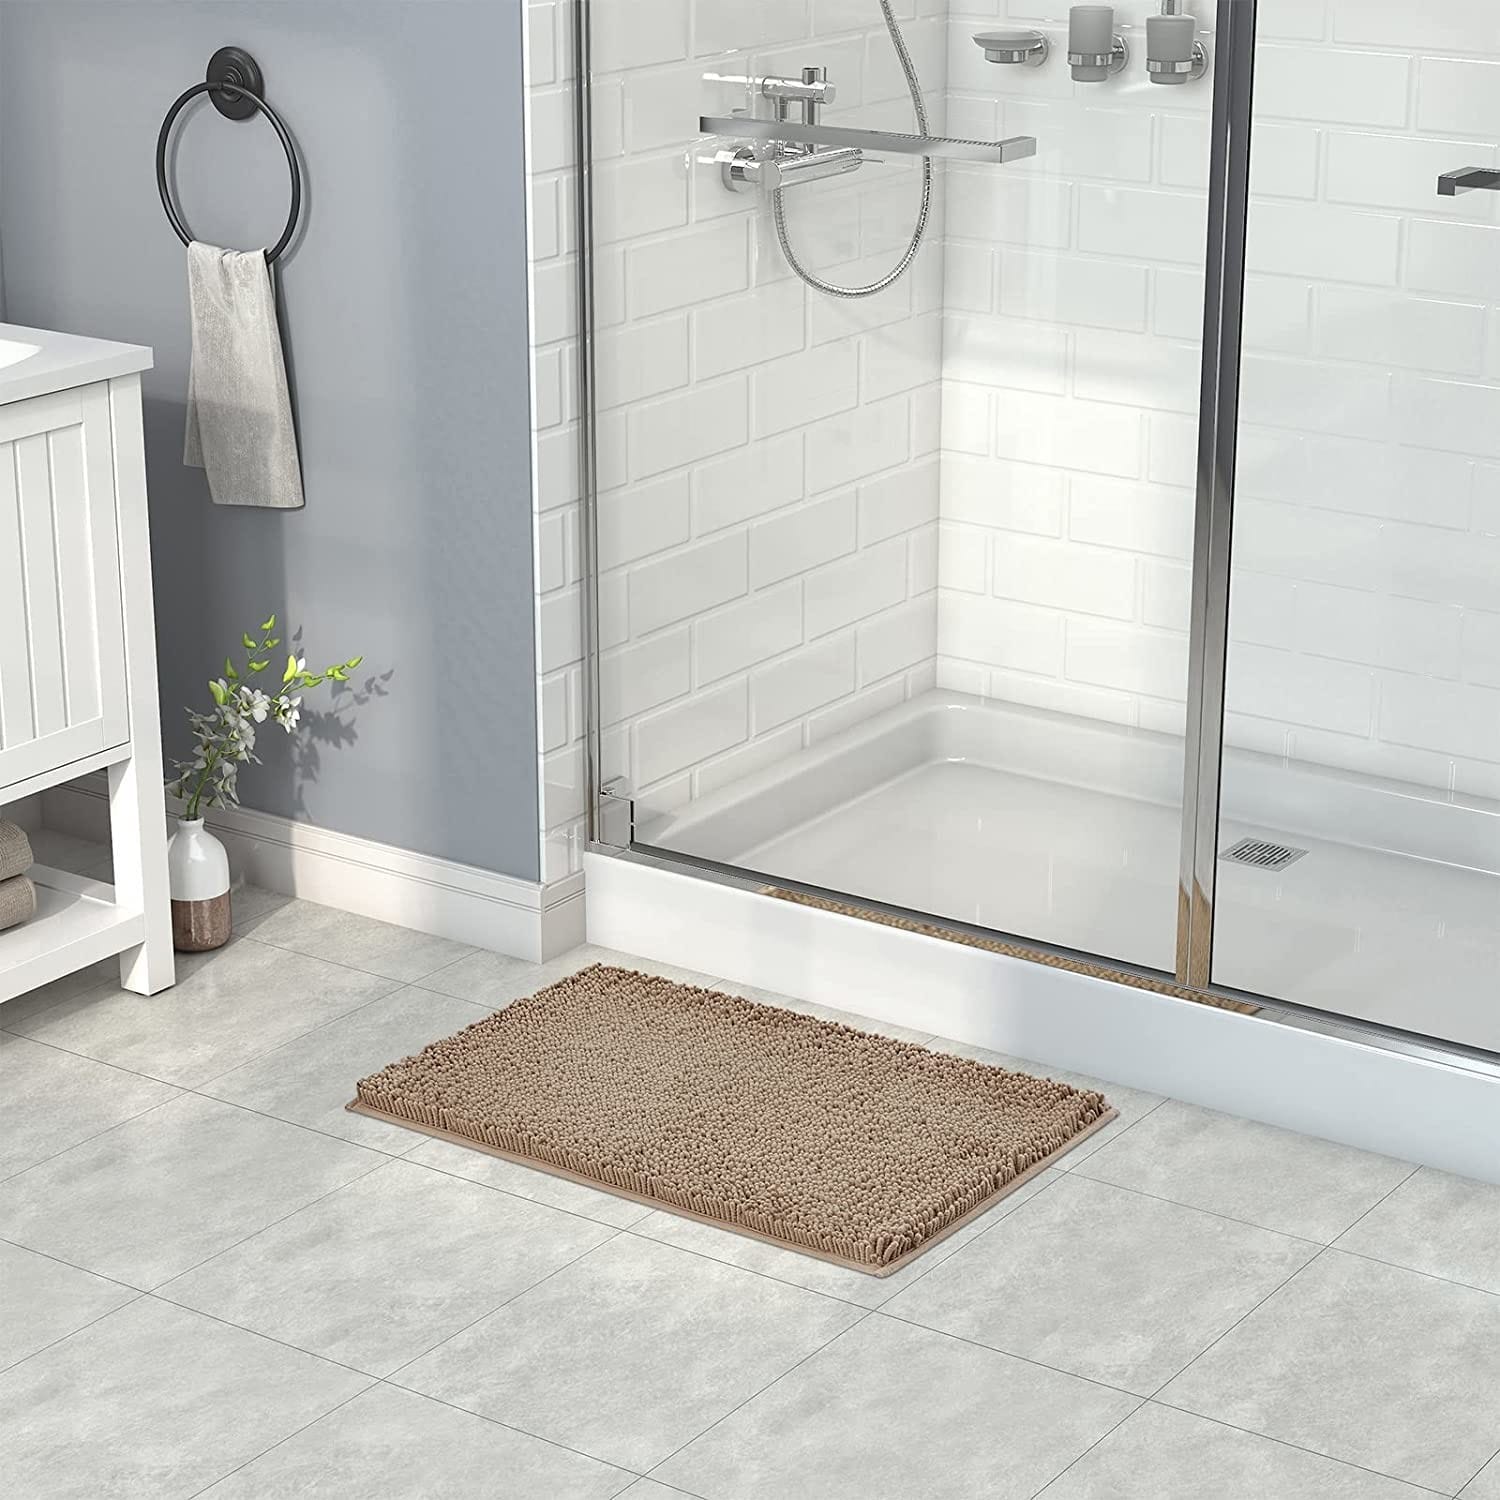 Bath Mat Sizes Guide  How to pick the right size bath rug? – Lifewitstore